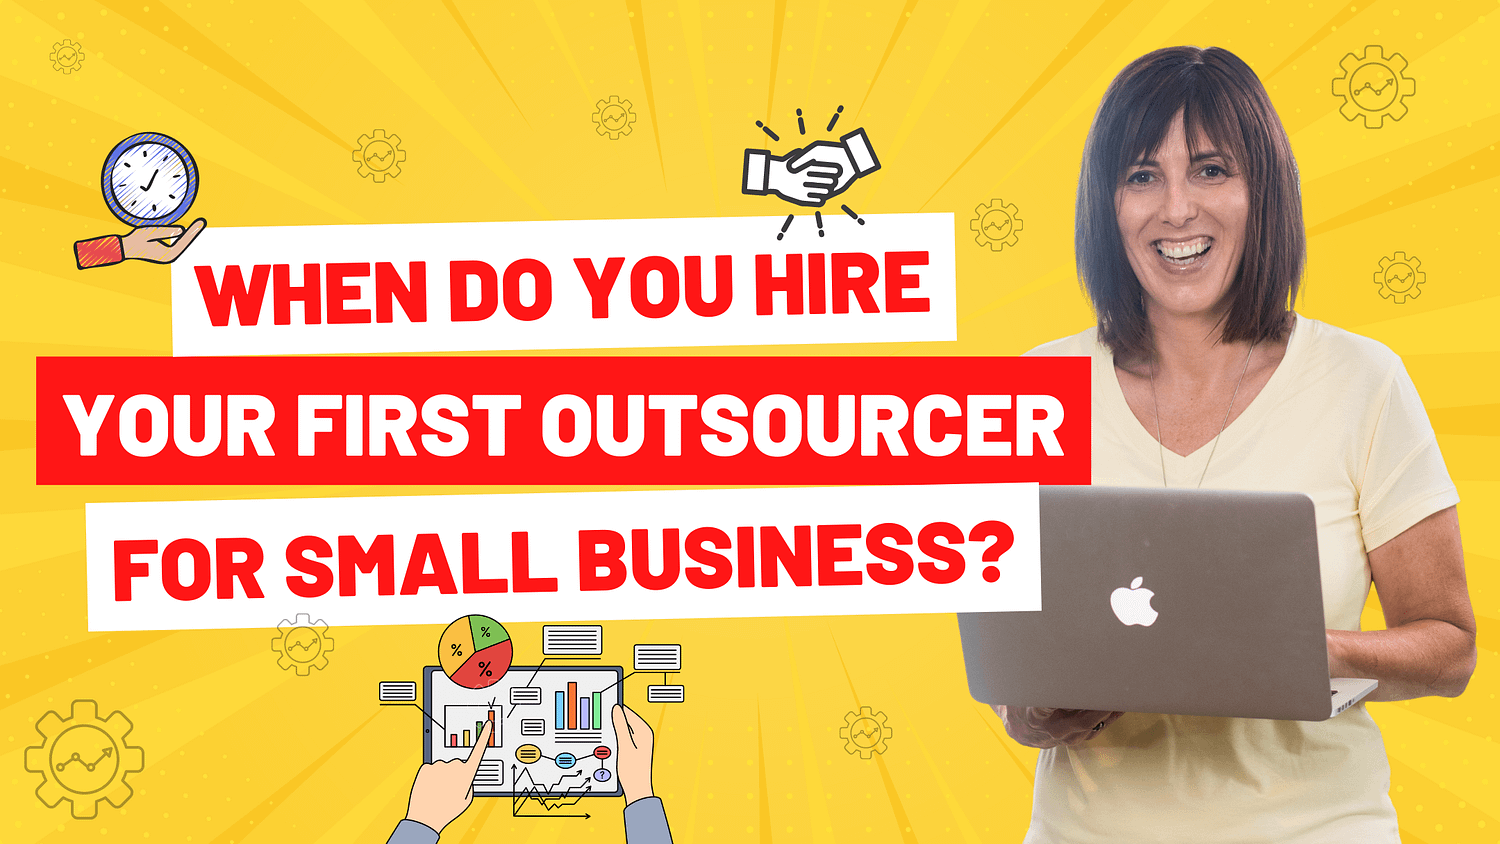 When Do You Hire Your First Outsourcer For Small Business?